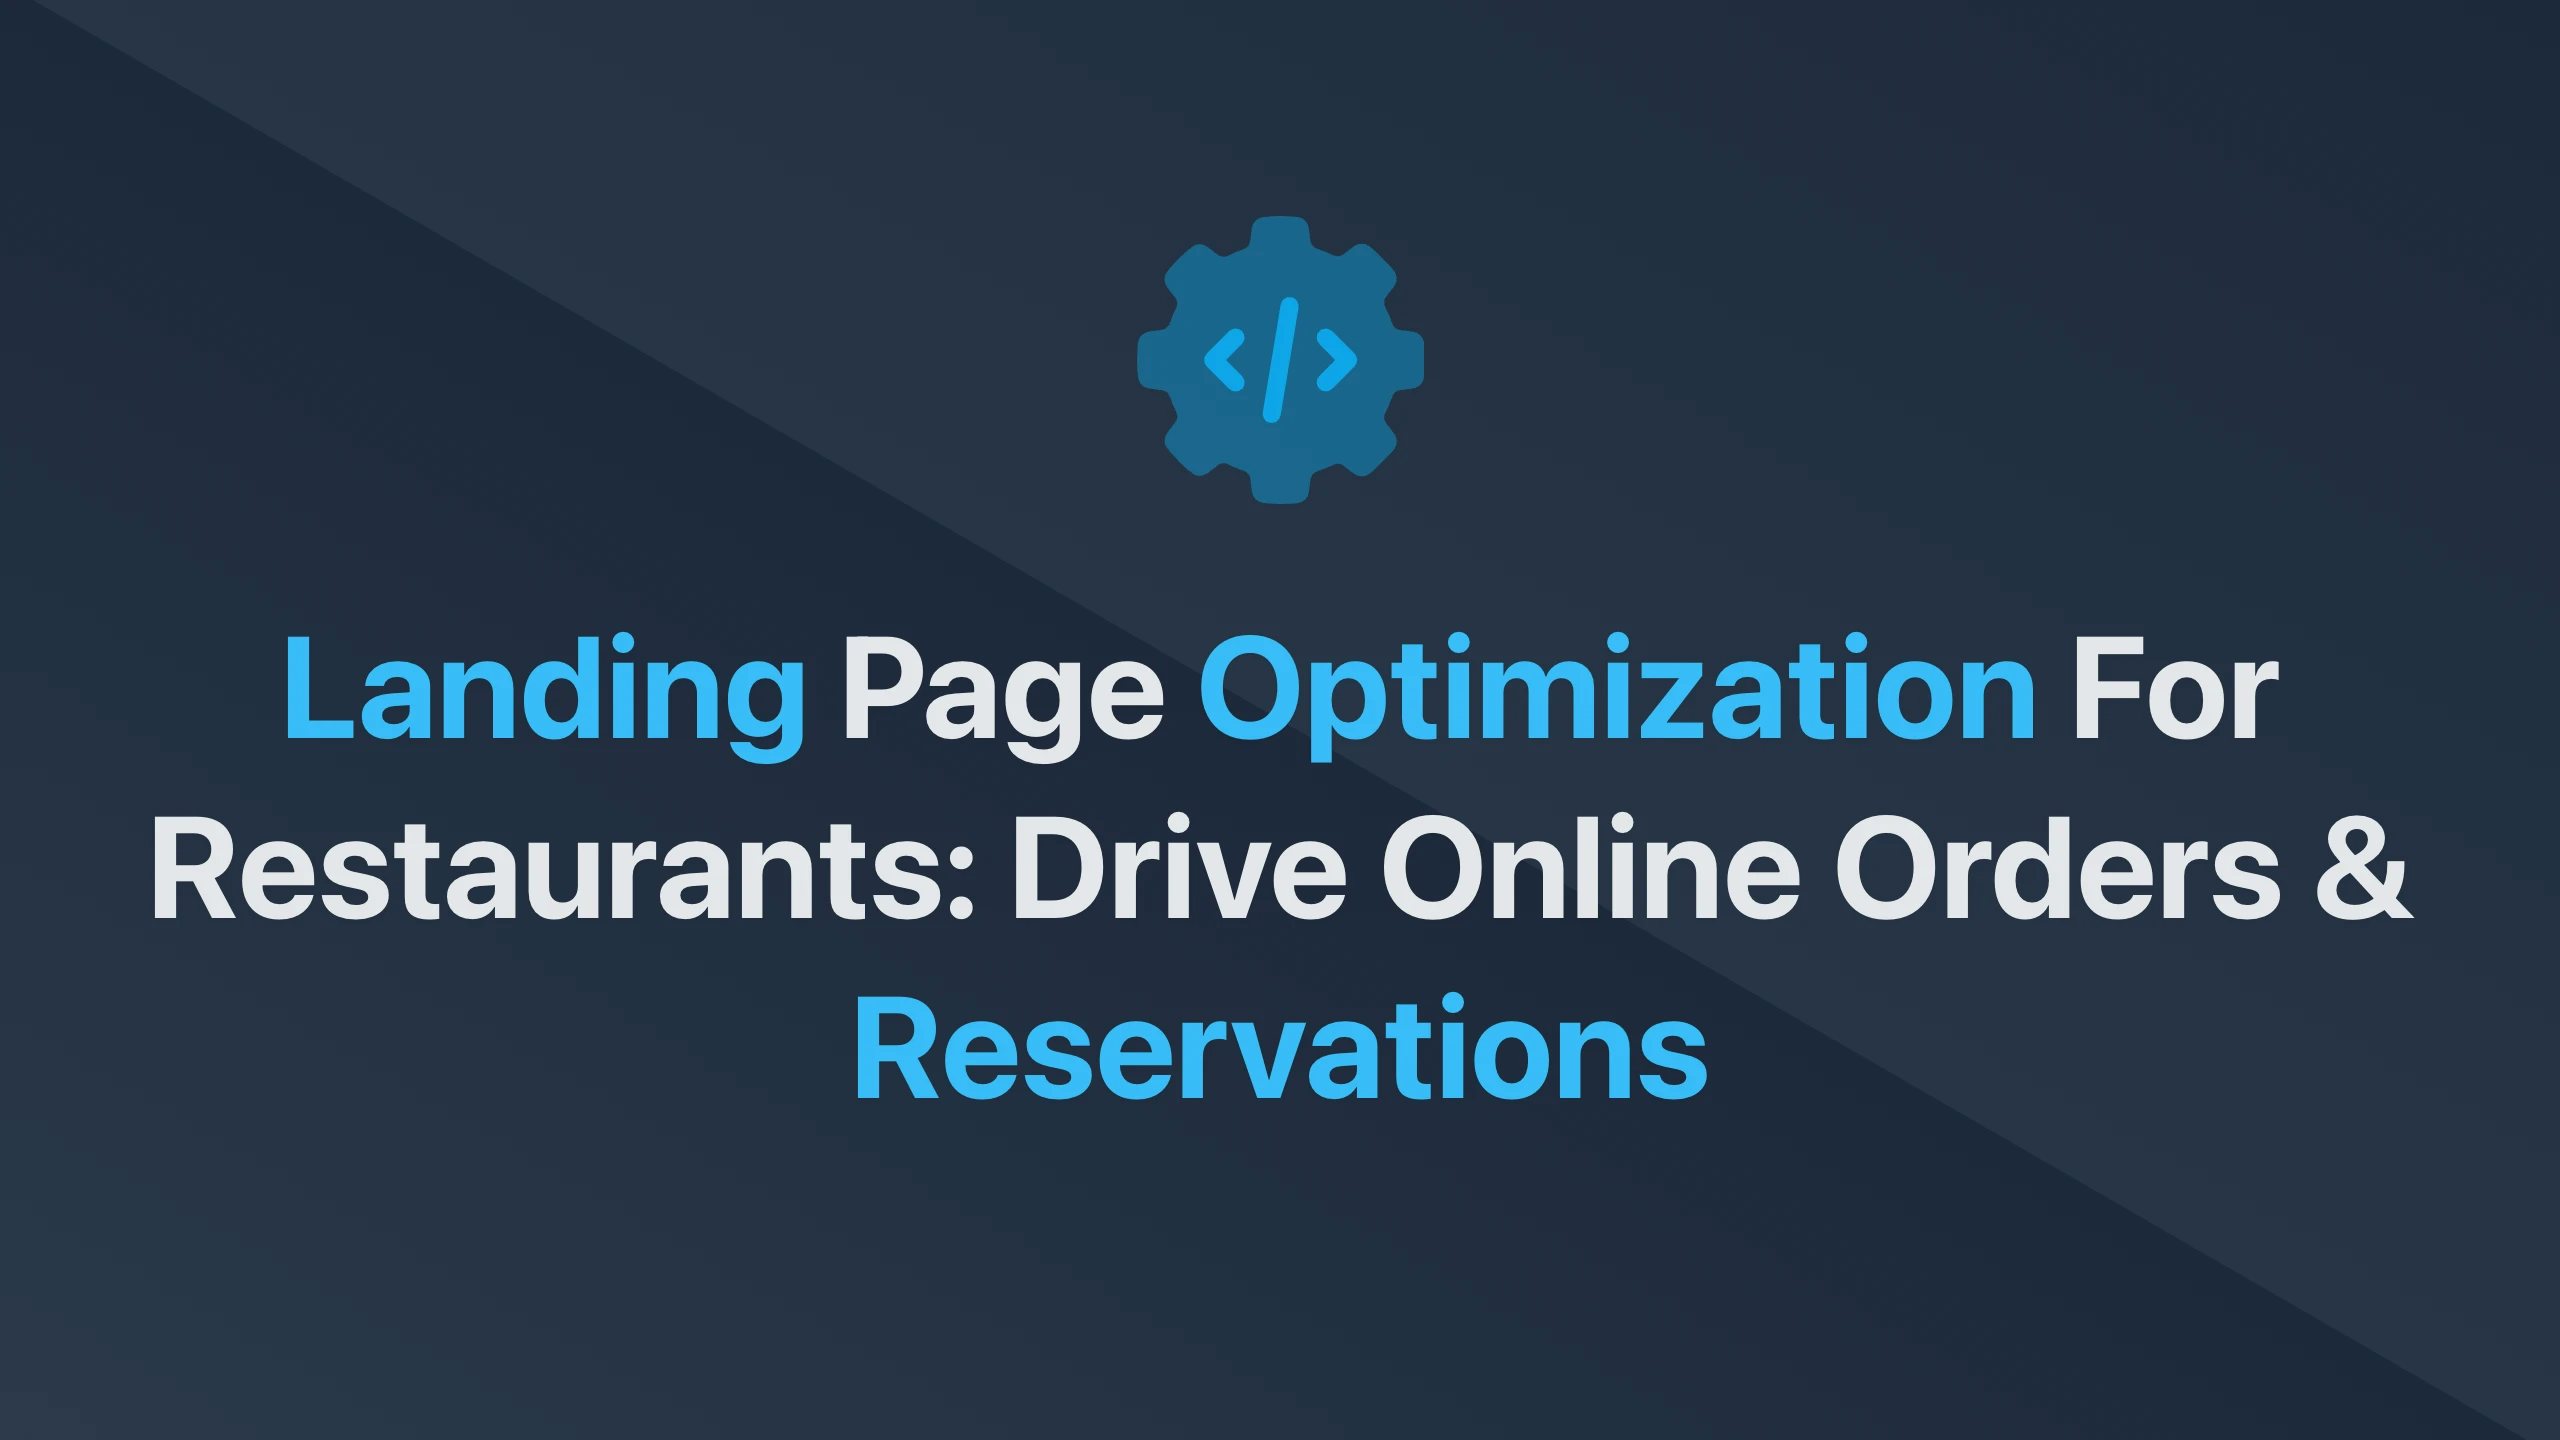 Cover Image for Landing Page Optimization for Restaurants: Drive Online Orders & Reservations